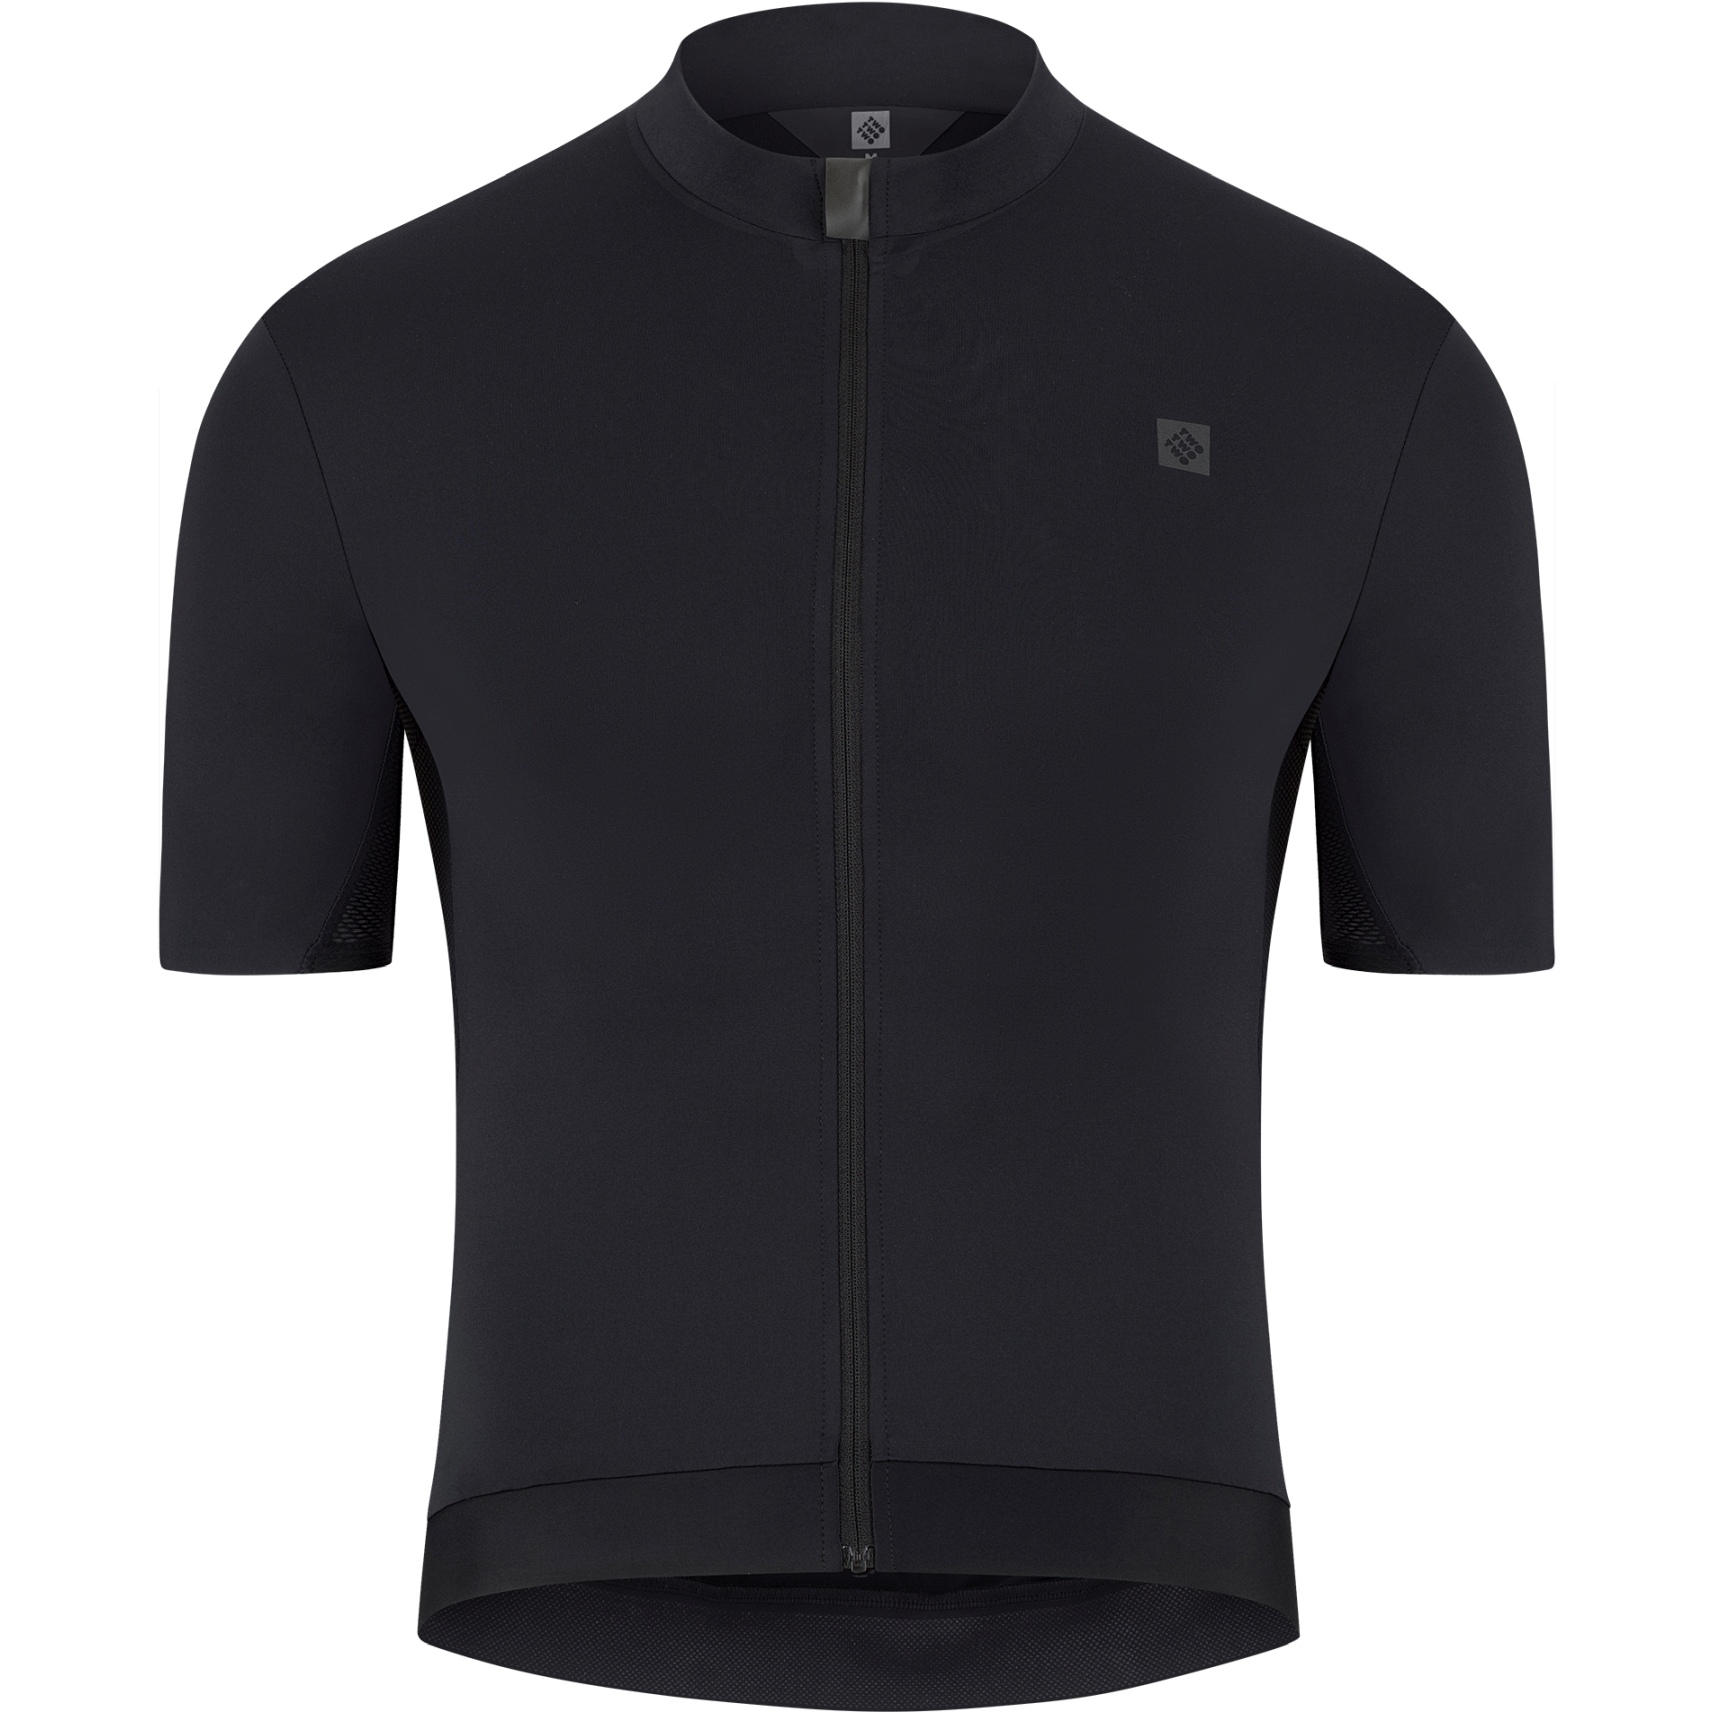 Image of triple2 Velozip Pro Jersey - moonless night